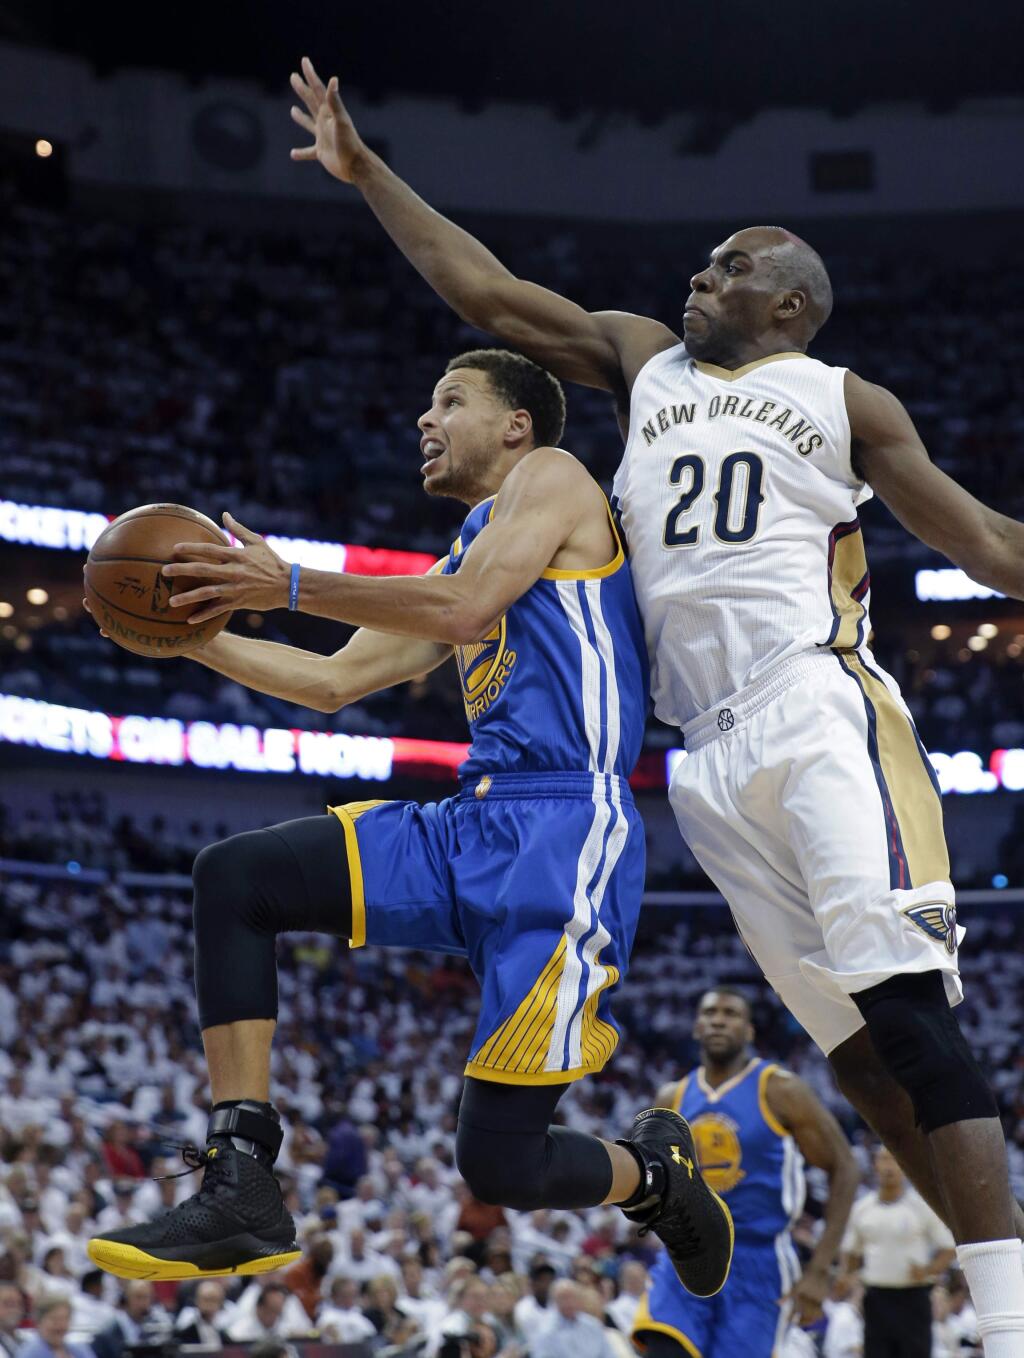 Golden State Warriors guard Stephen Curry goes to the basket against New Orleans Pelicans guard Quincy Pondexter (20) during the first half of Game 4 of a first-round NBA basketball playoff series in New Orleans, Saturday, April 25, 2015. (AP Photo/Gerald Herbert)